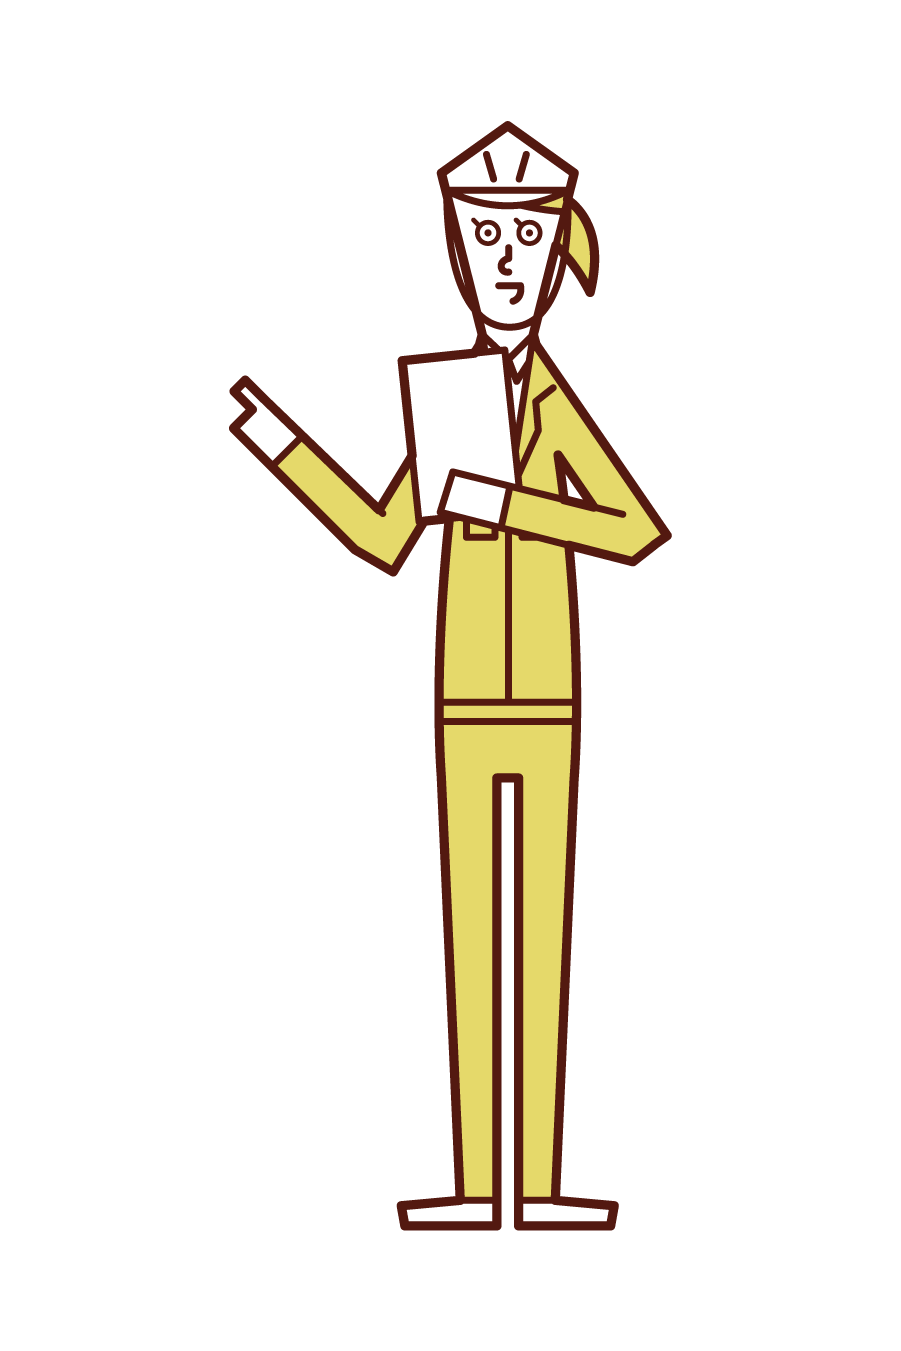 Illustration of a person (woman) who confirms safety and calls